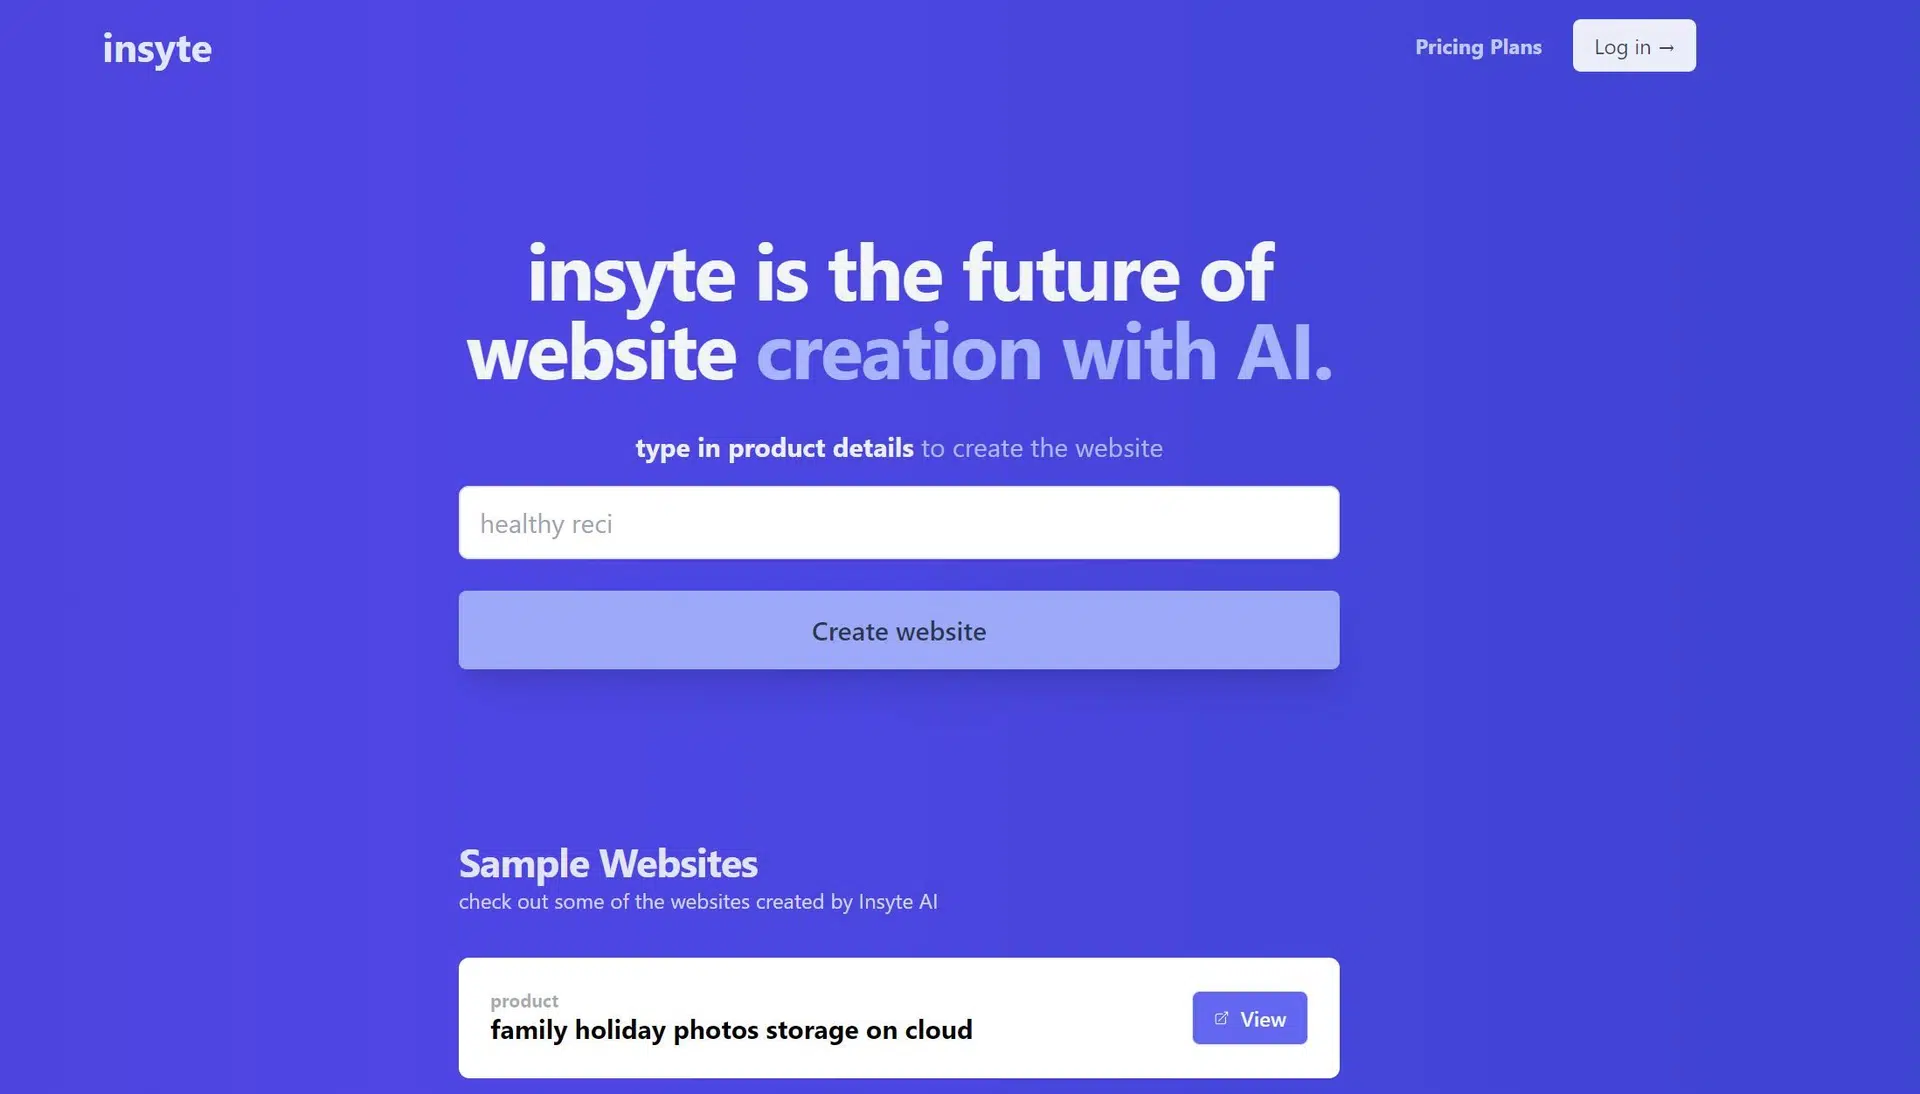 Insyte AIwebsite picture